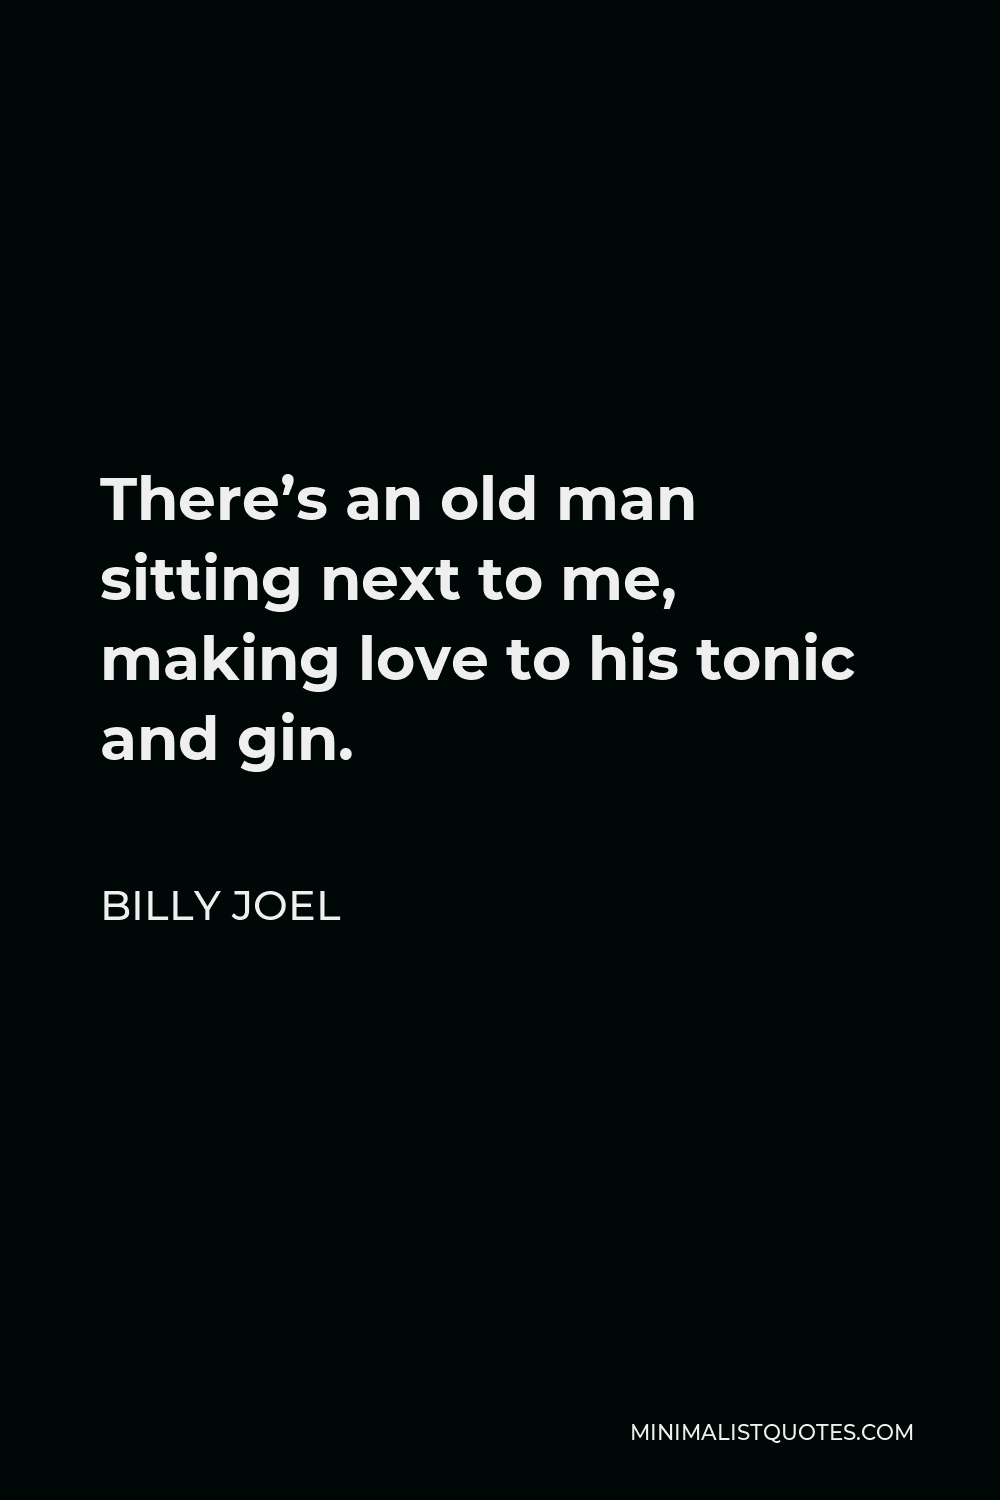 Billy Joel Quote - There’s an old man sitting next to me, making love to his tonic and gin.